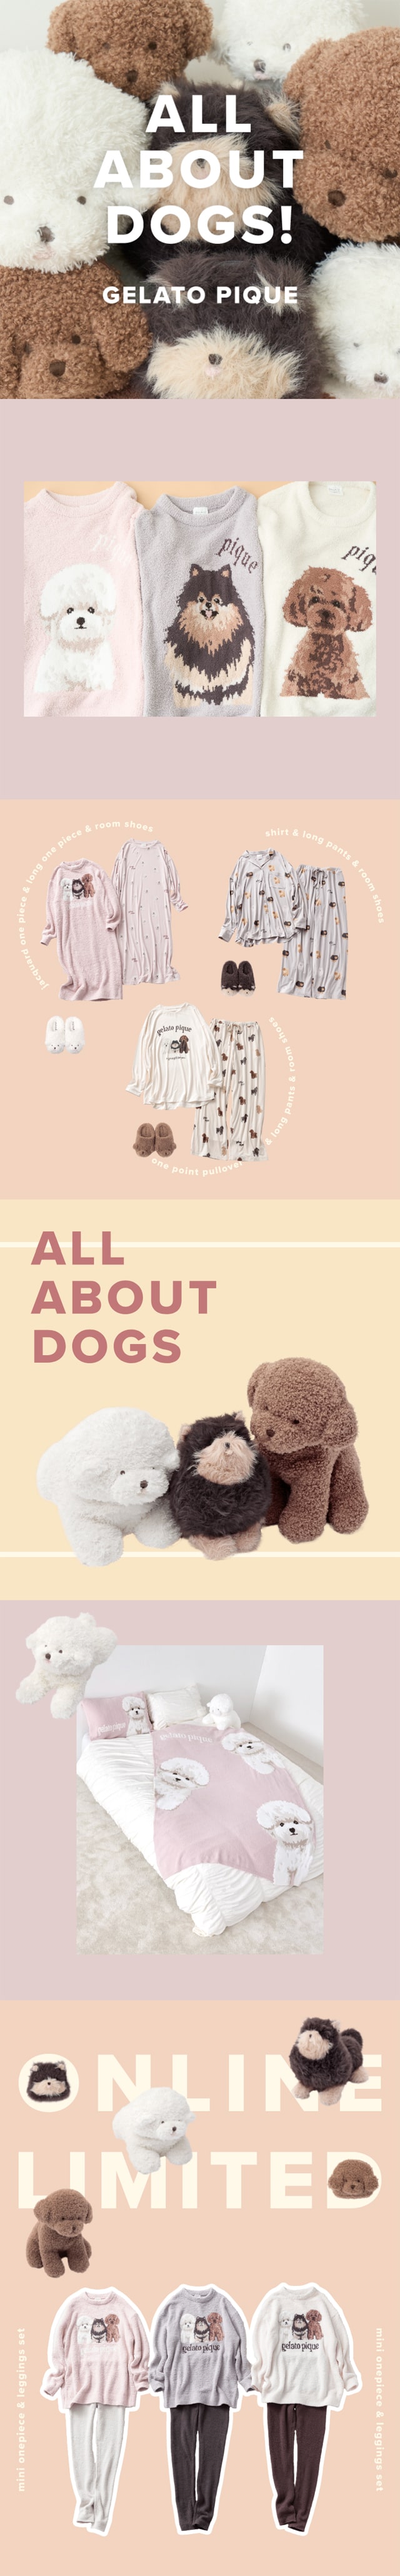 ALL ABOUT DOGS!_sp_1